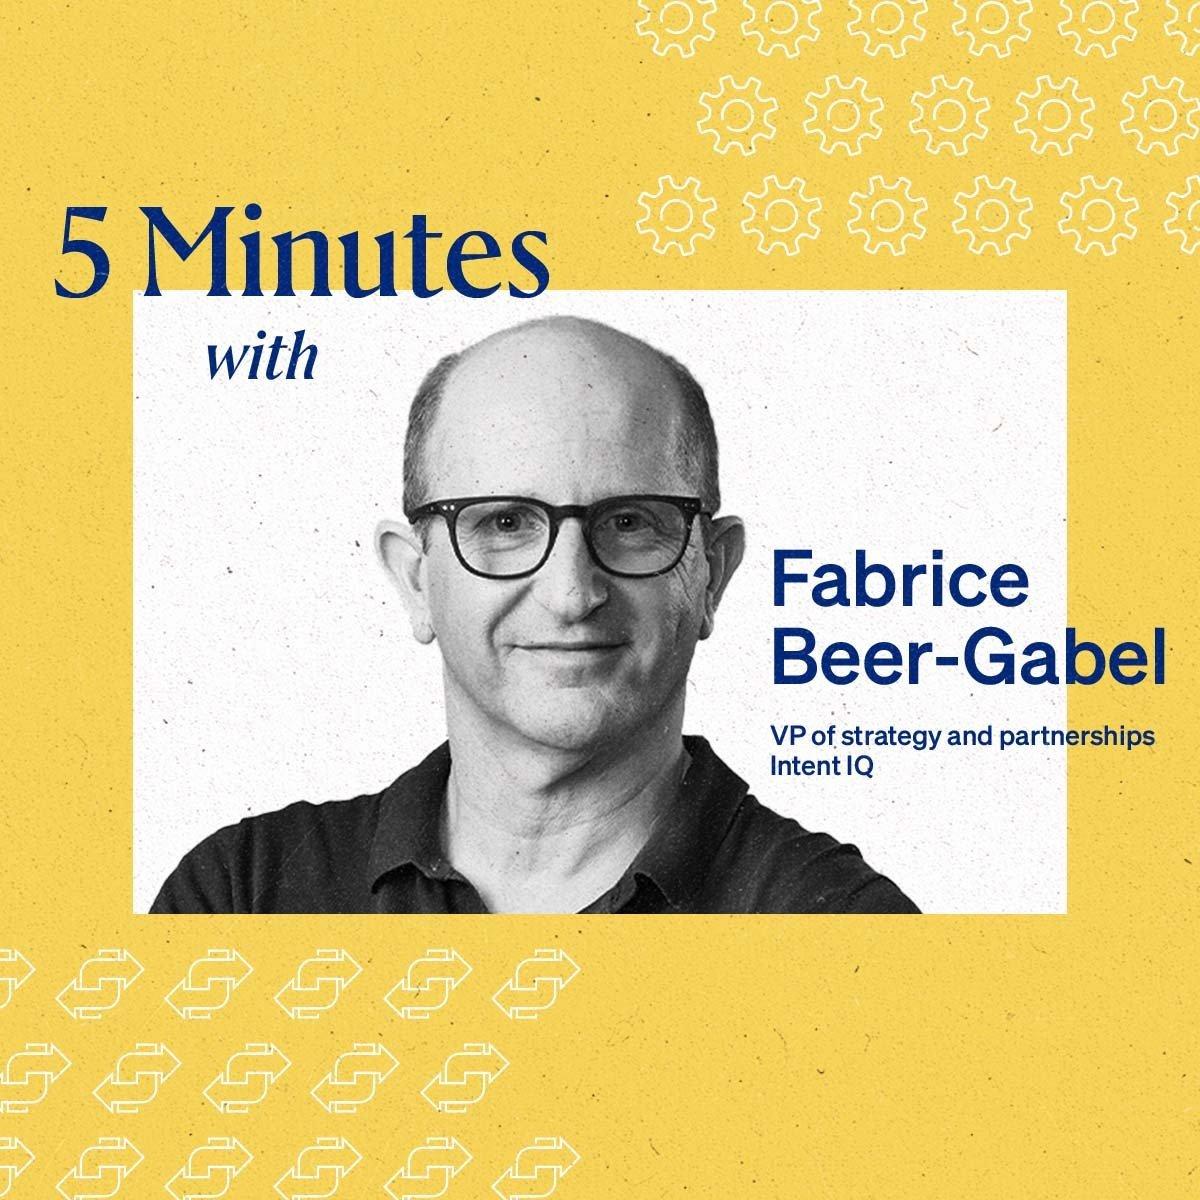 5 Minutes with Fabrice Beer-Gabel, VP of strategy and partnerships, Intent IQ